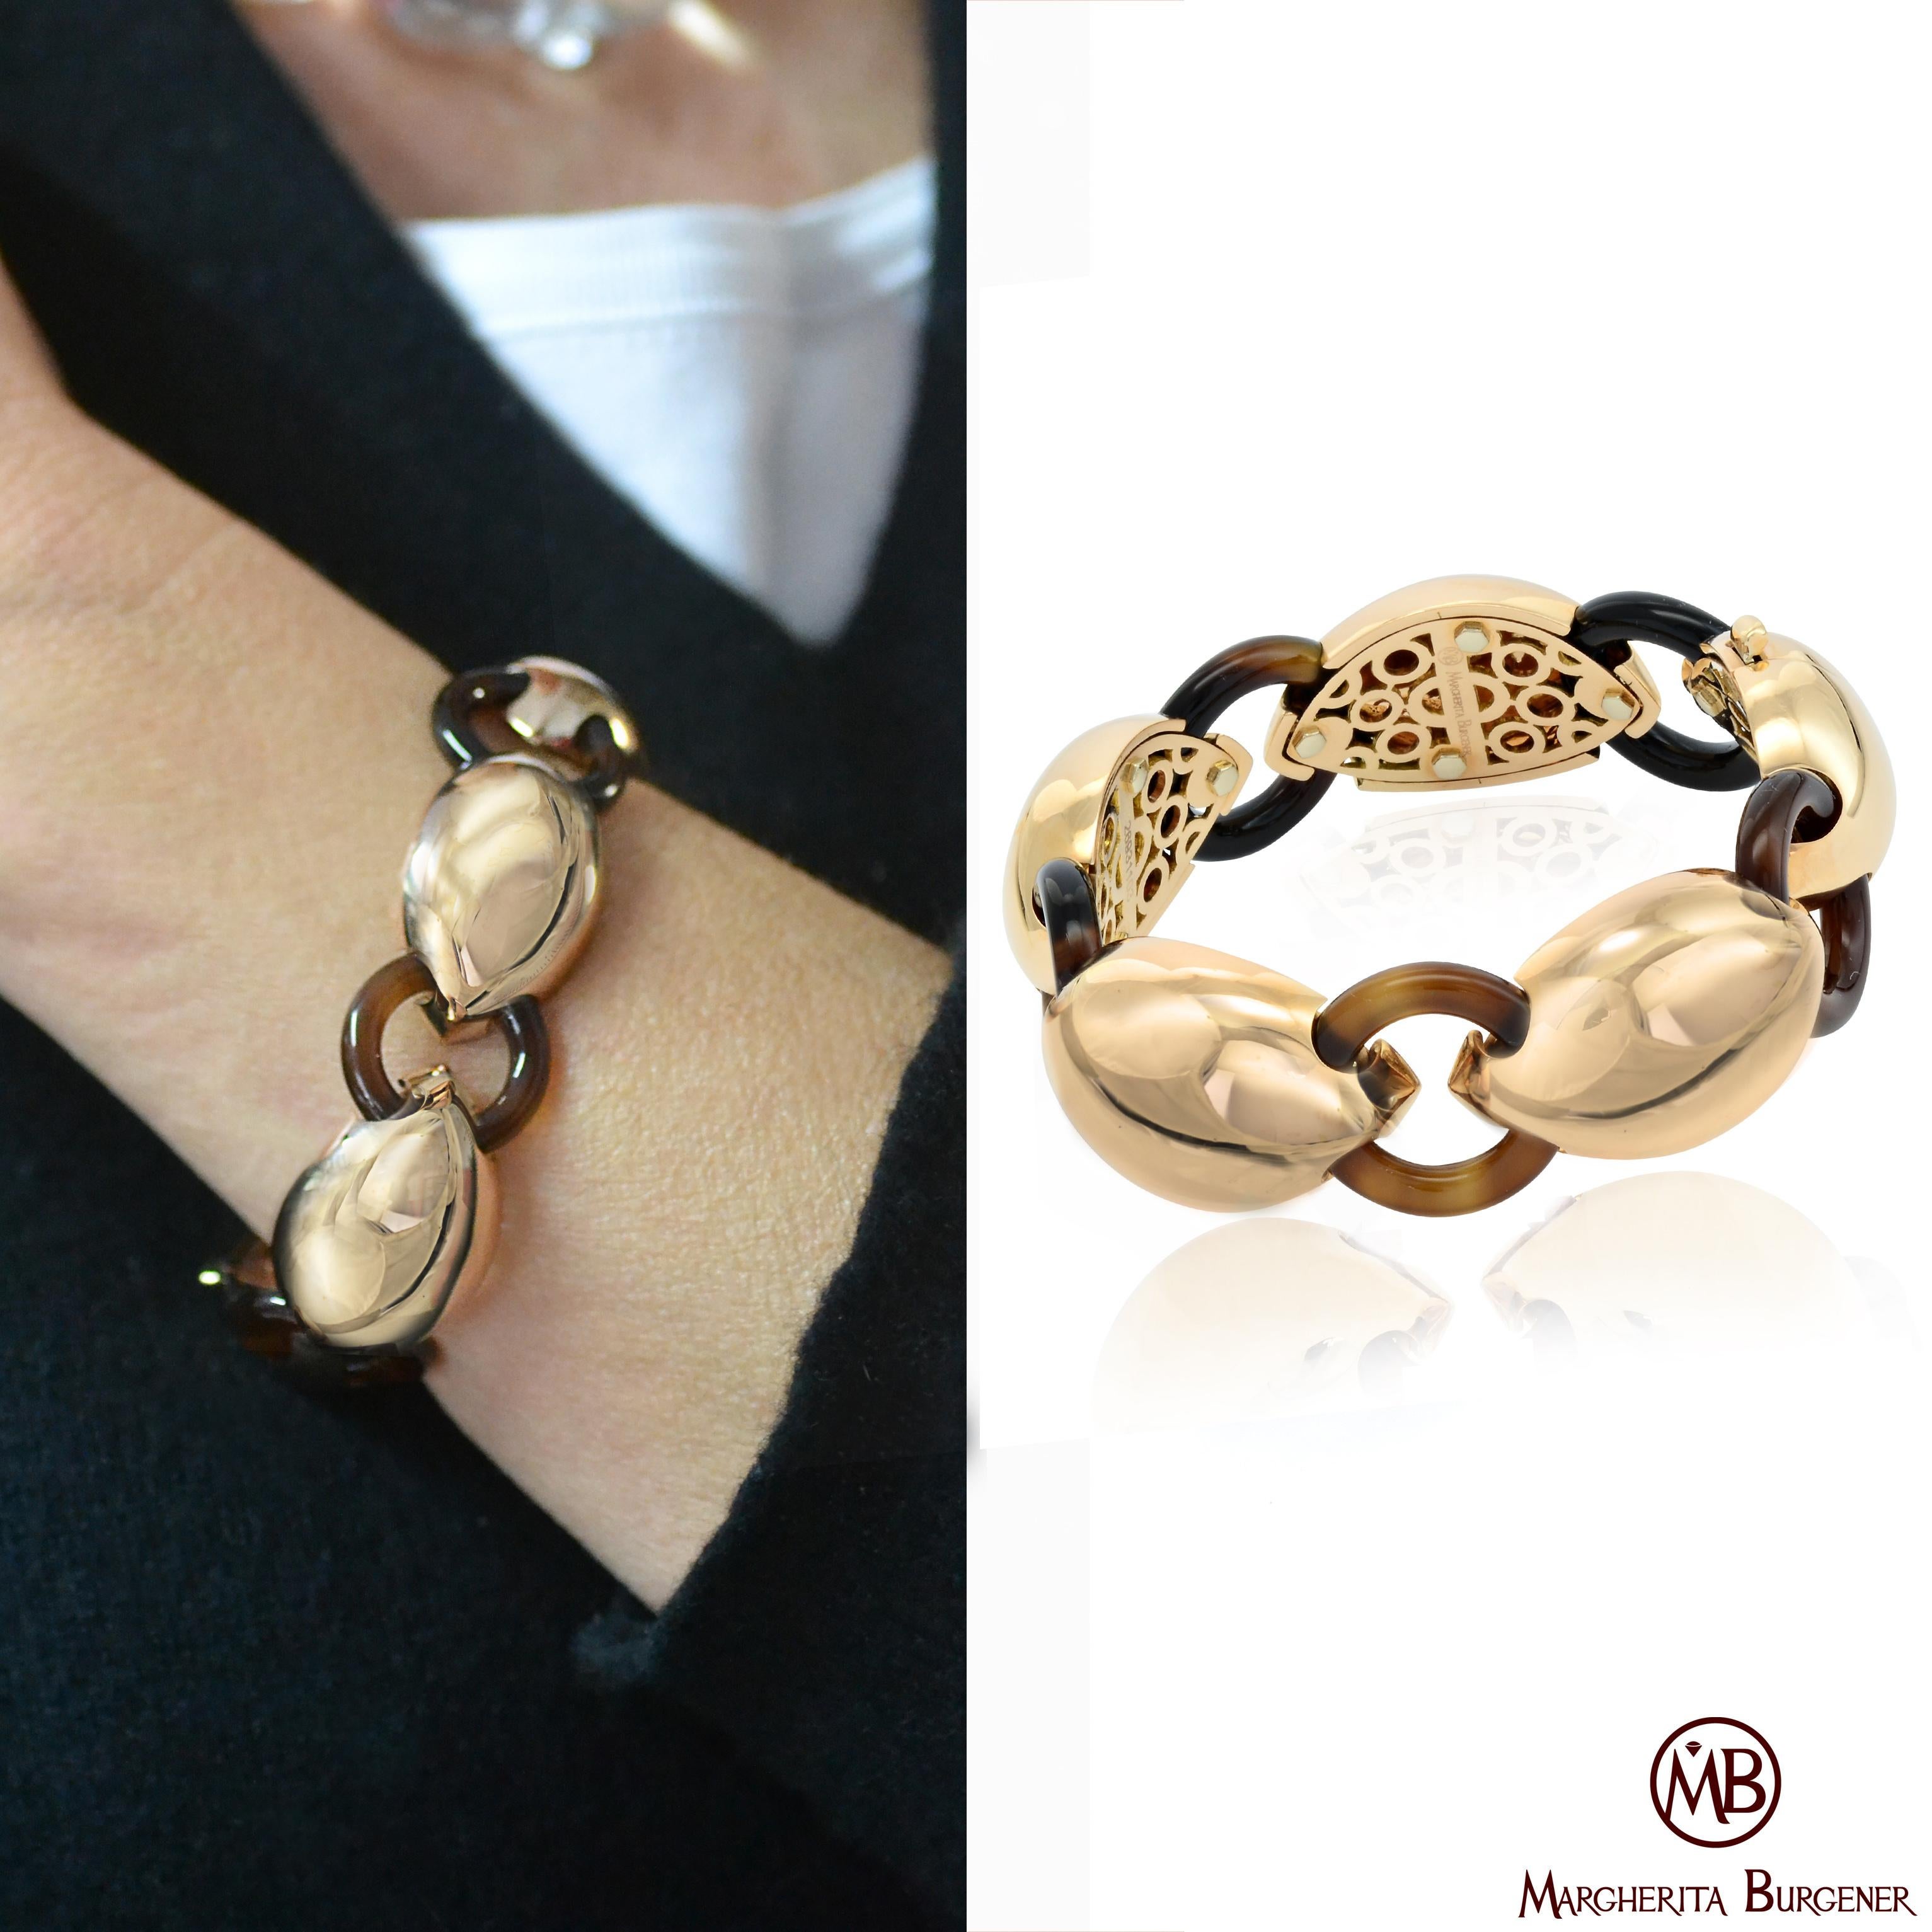 Handcrafted in Italy, in Margherita Burgener workshop, the bracelet is composed by a series of bombé motif in polished 18 KT rose gold, linked by ovals in natural brown agate.
Beautifully decorated the inside part of each motif. 
Screwed with